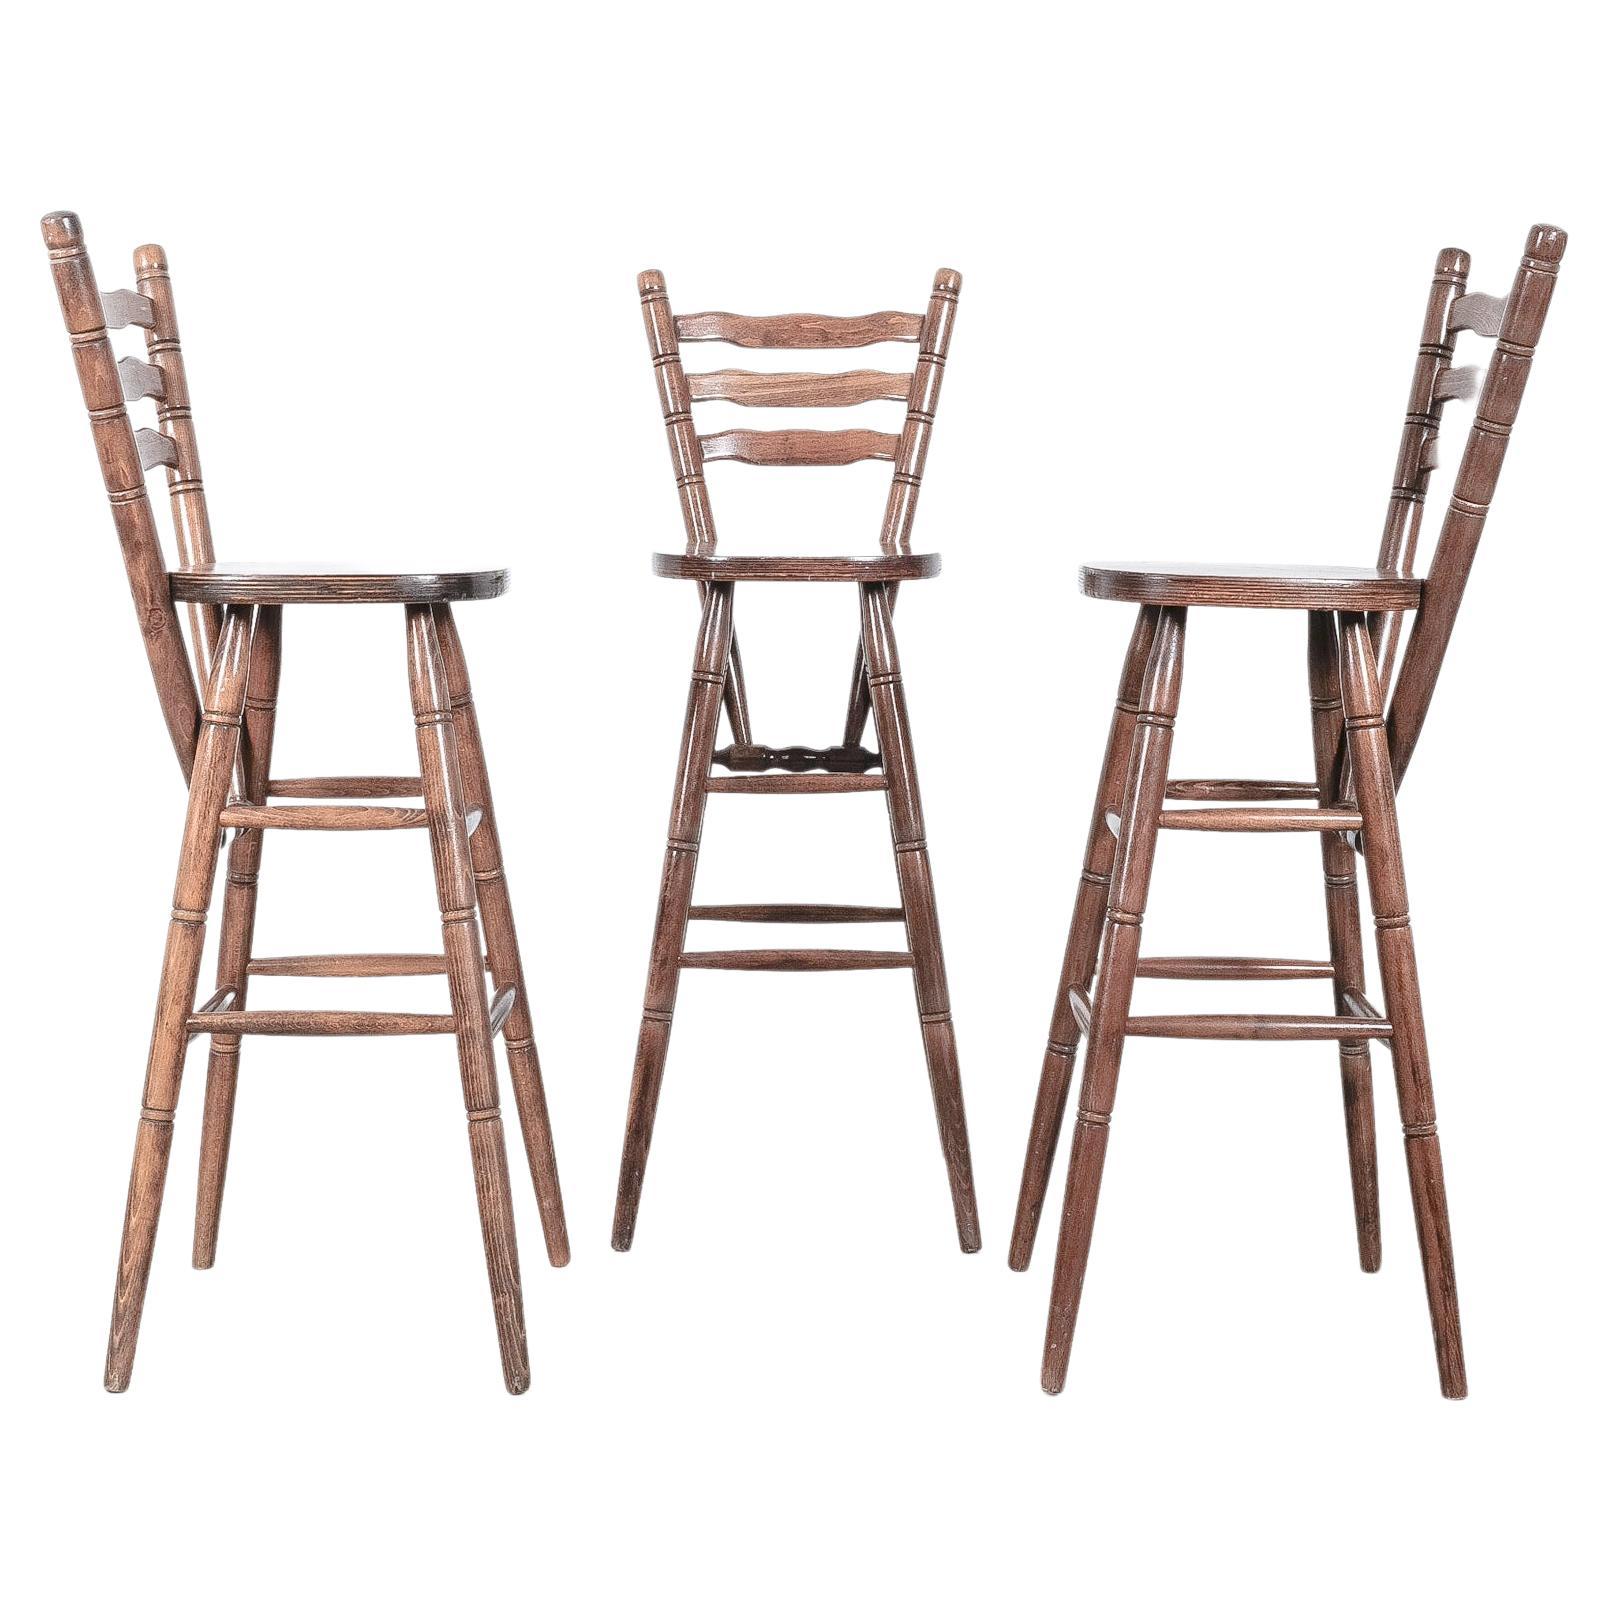 Rustic Bar Stools Midcentury from Birch Wood, Germany, 1970 For Sale